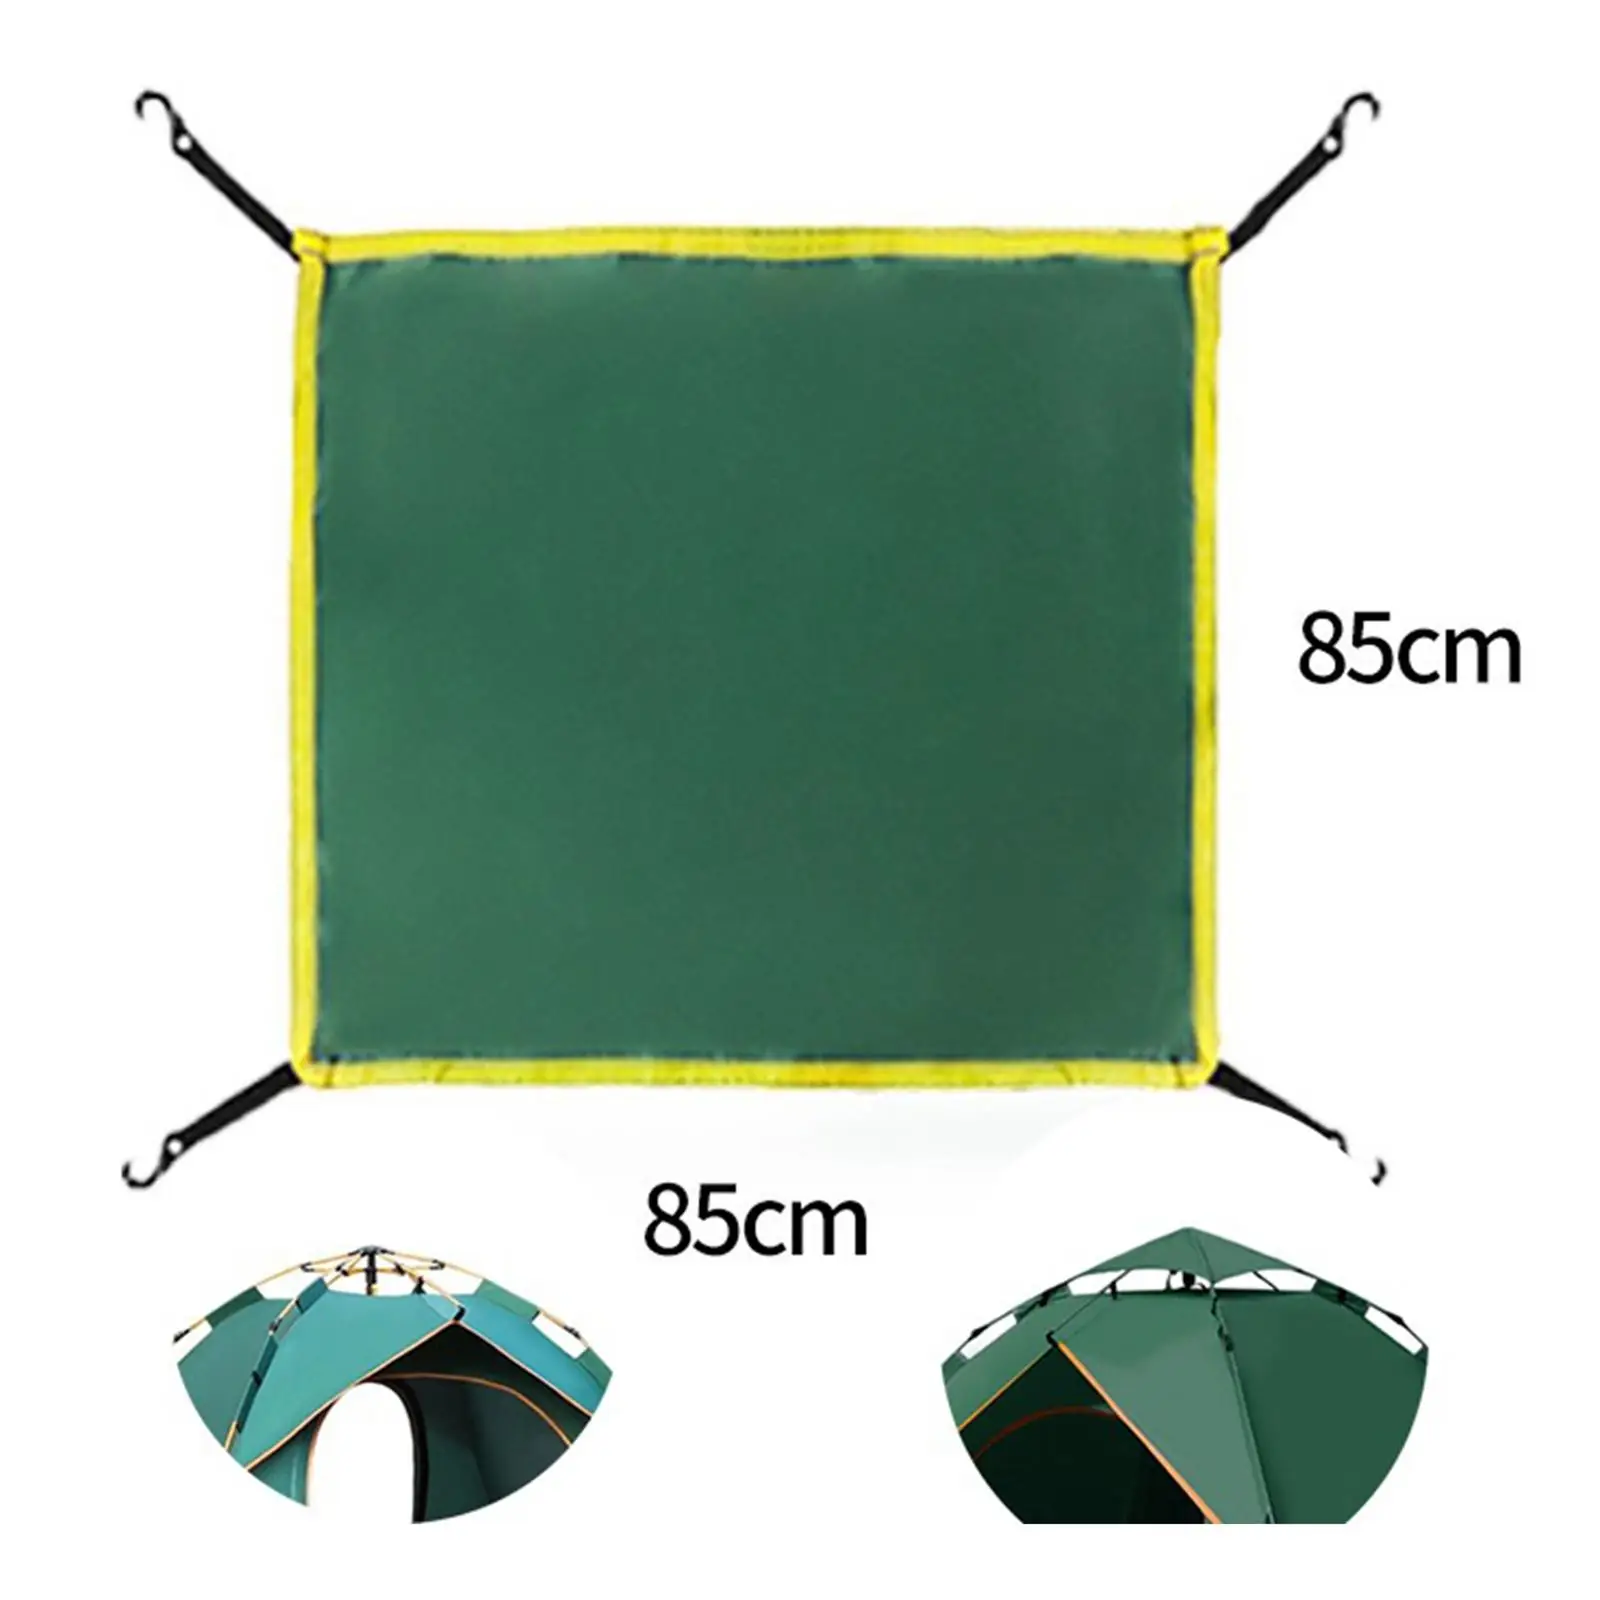 Dome Tent Cover Replacement Holiday Portable Outdoor Canopy Tent Top Cover